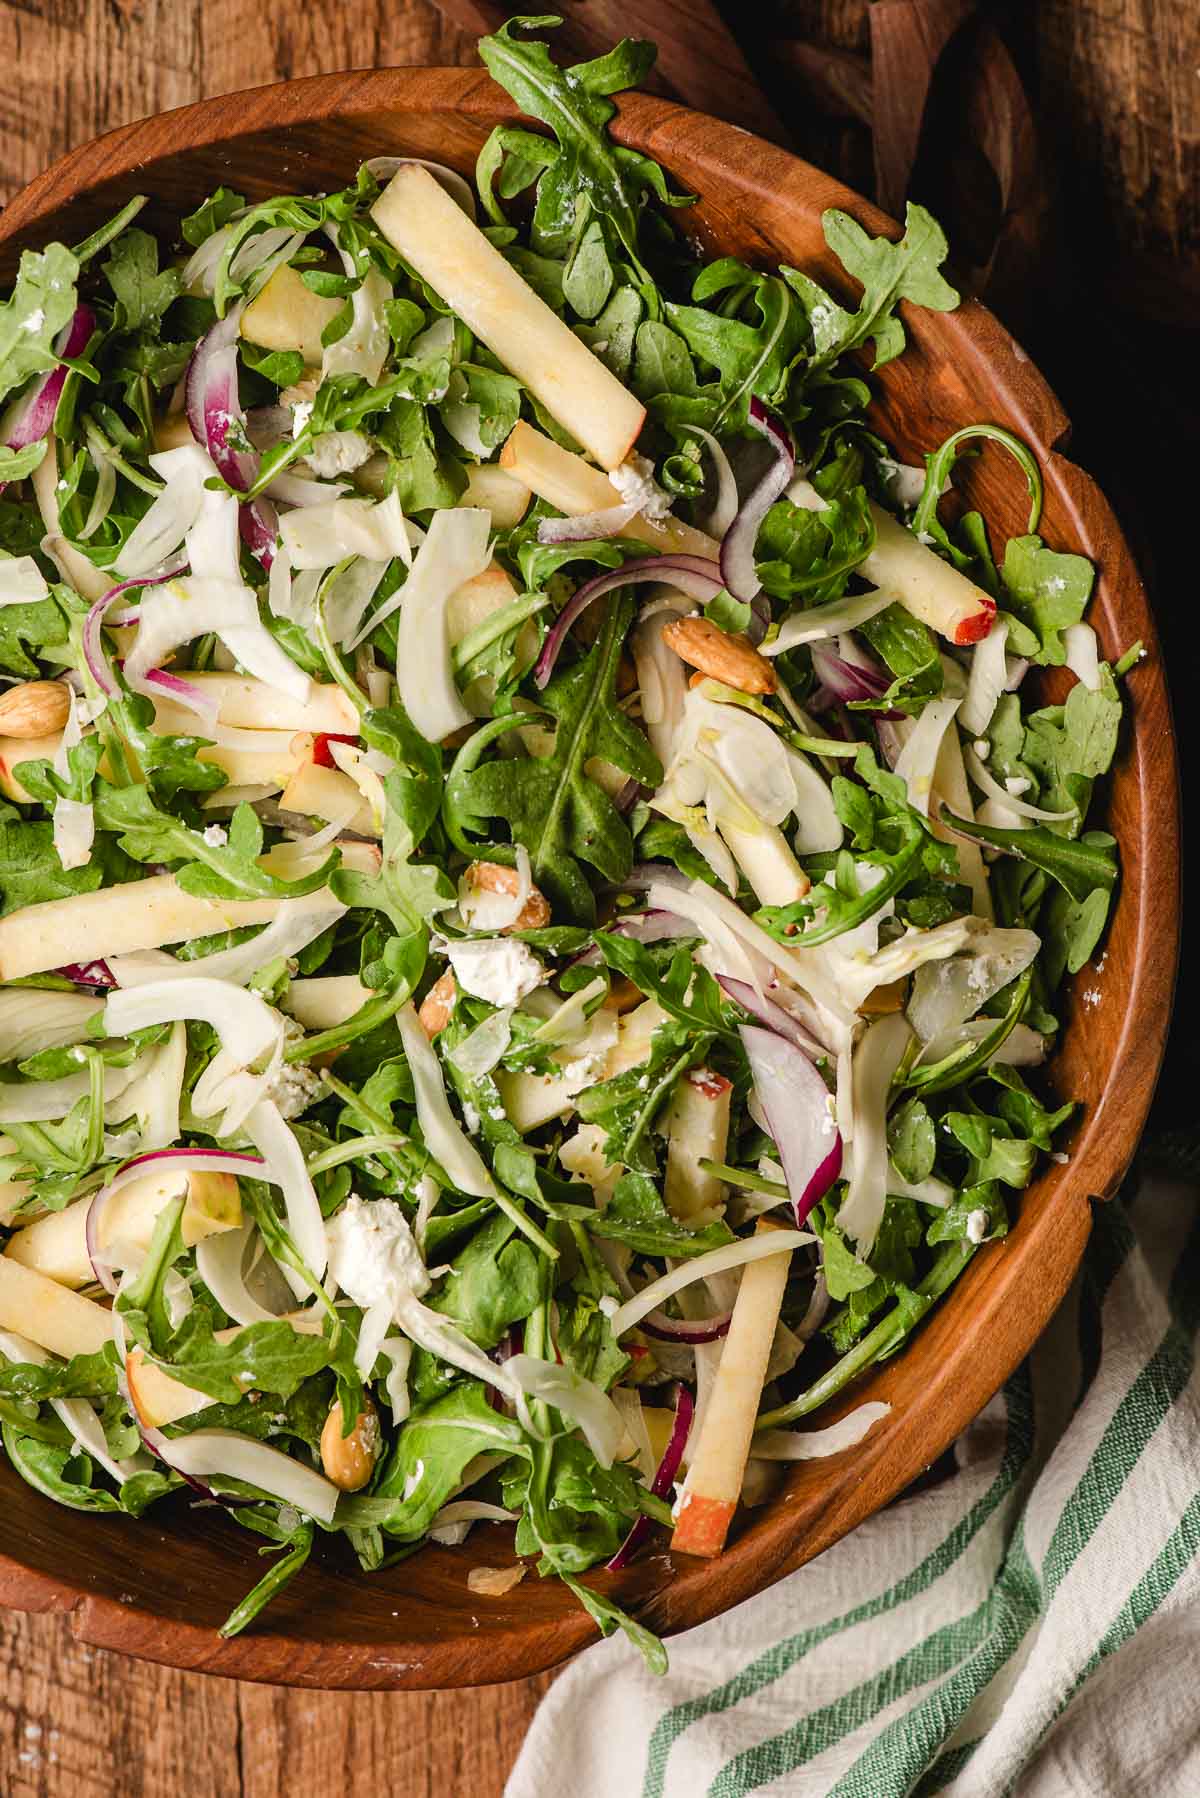 Arugula, fennel, and world salad with goat cheese and almonds in a wooden bowl.